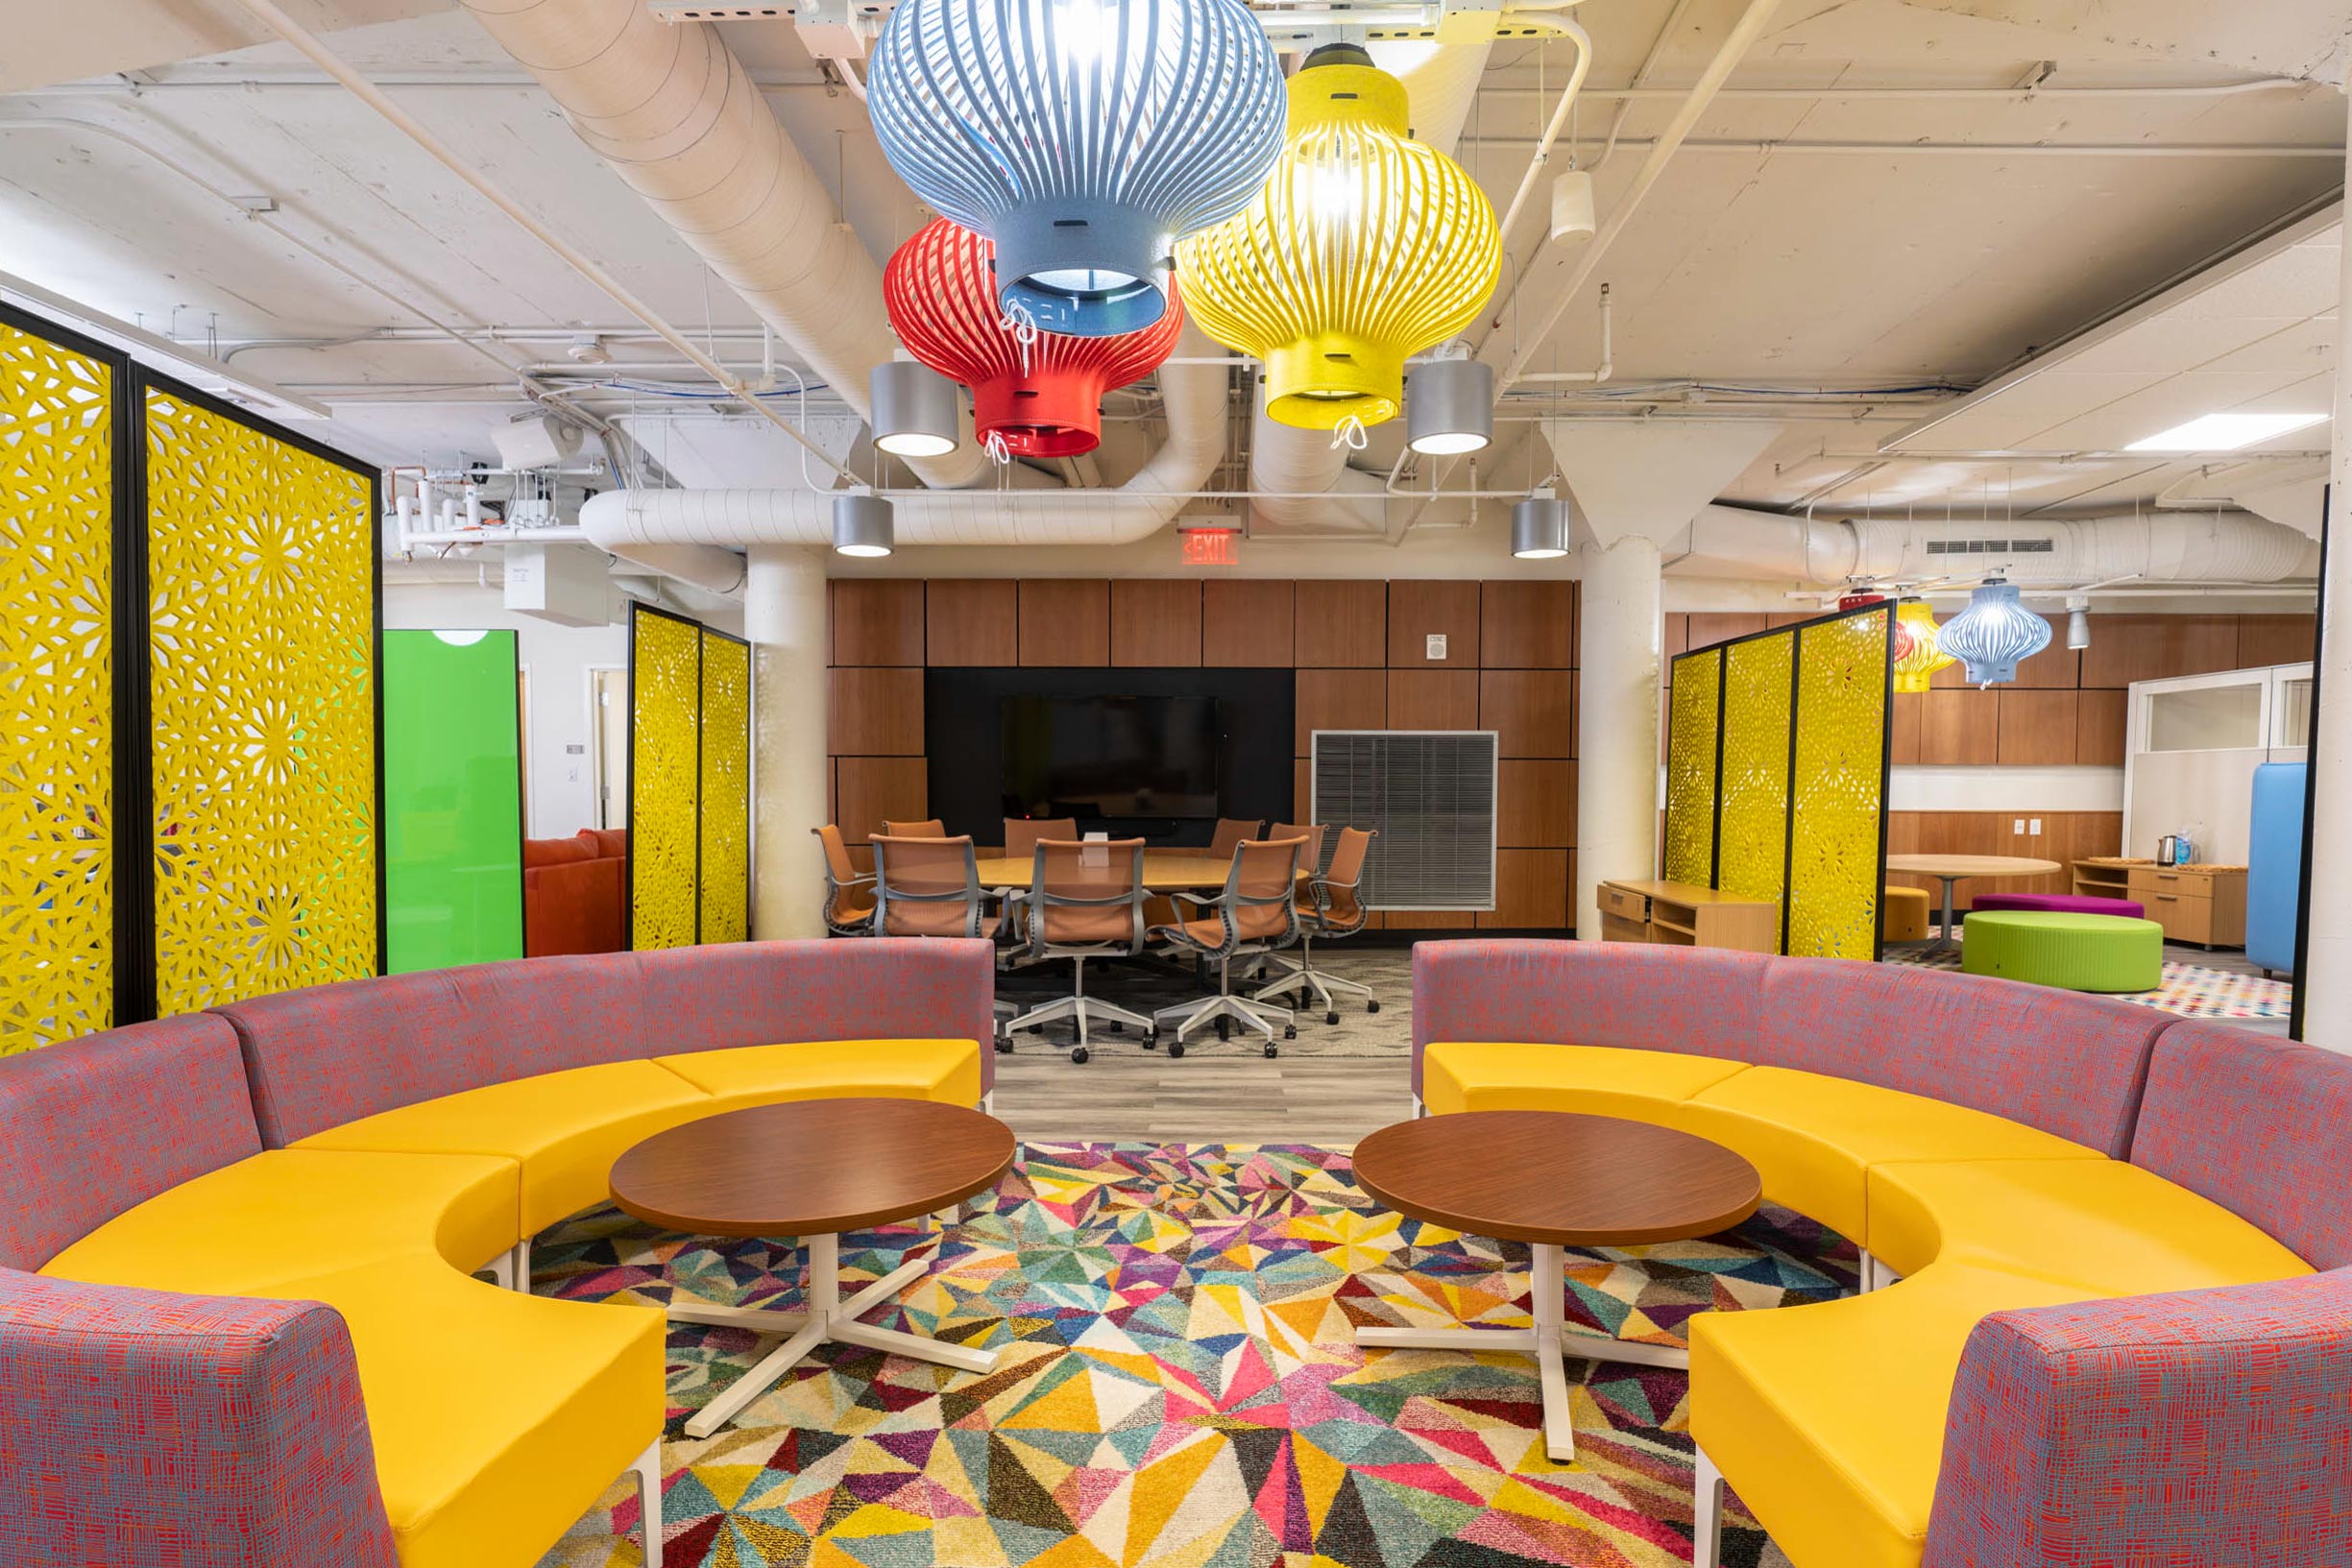 Colorful, comfortable furnishings welcome students to the new Multicultural Student Center.